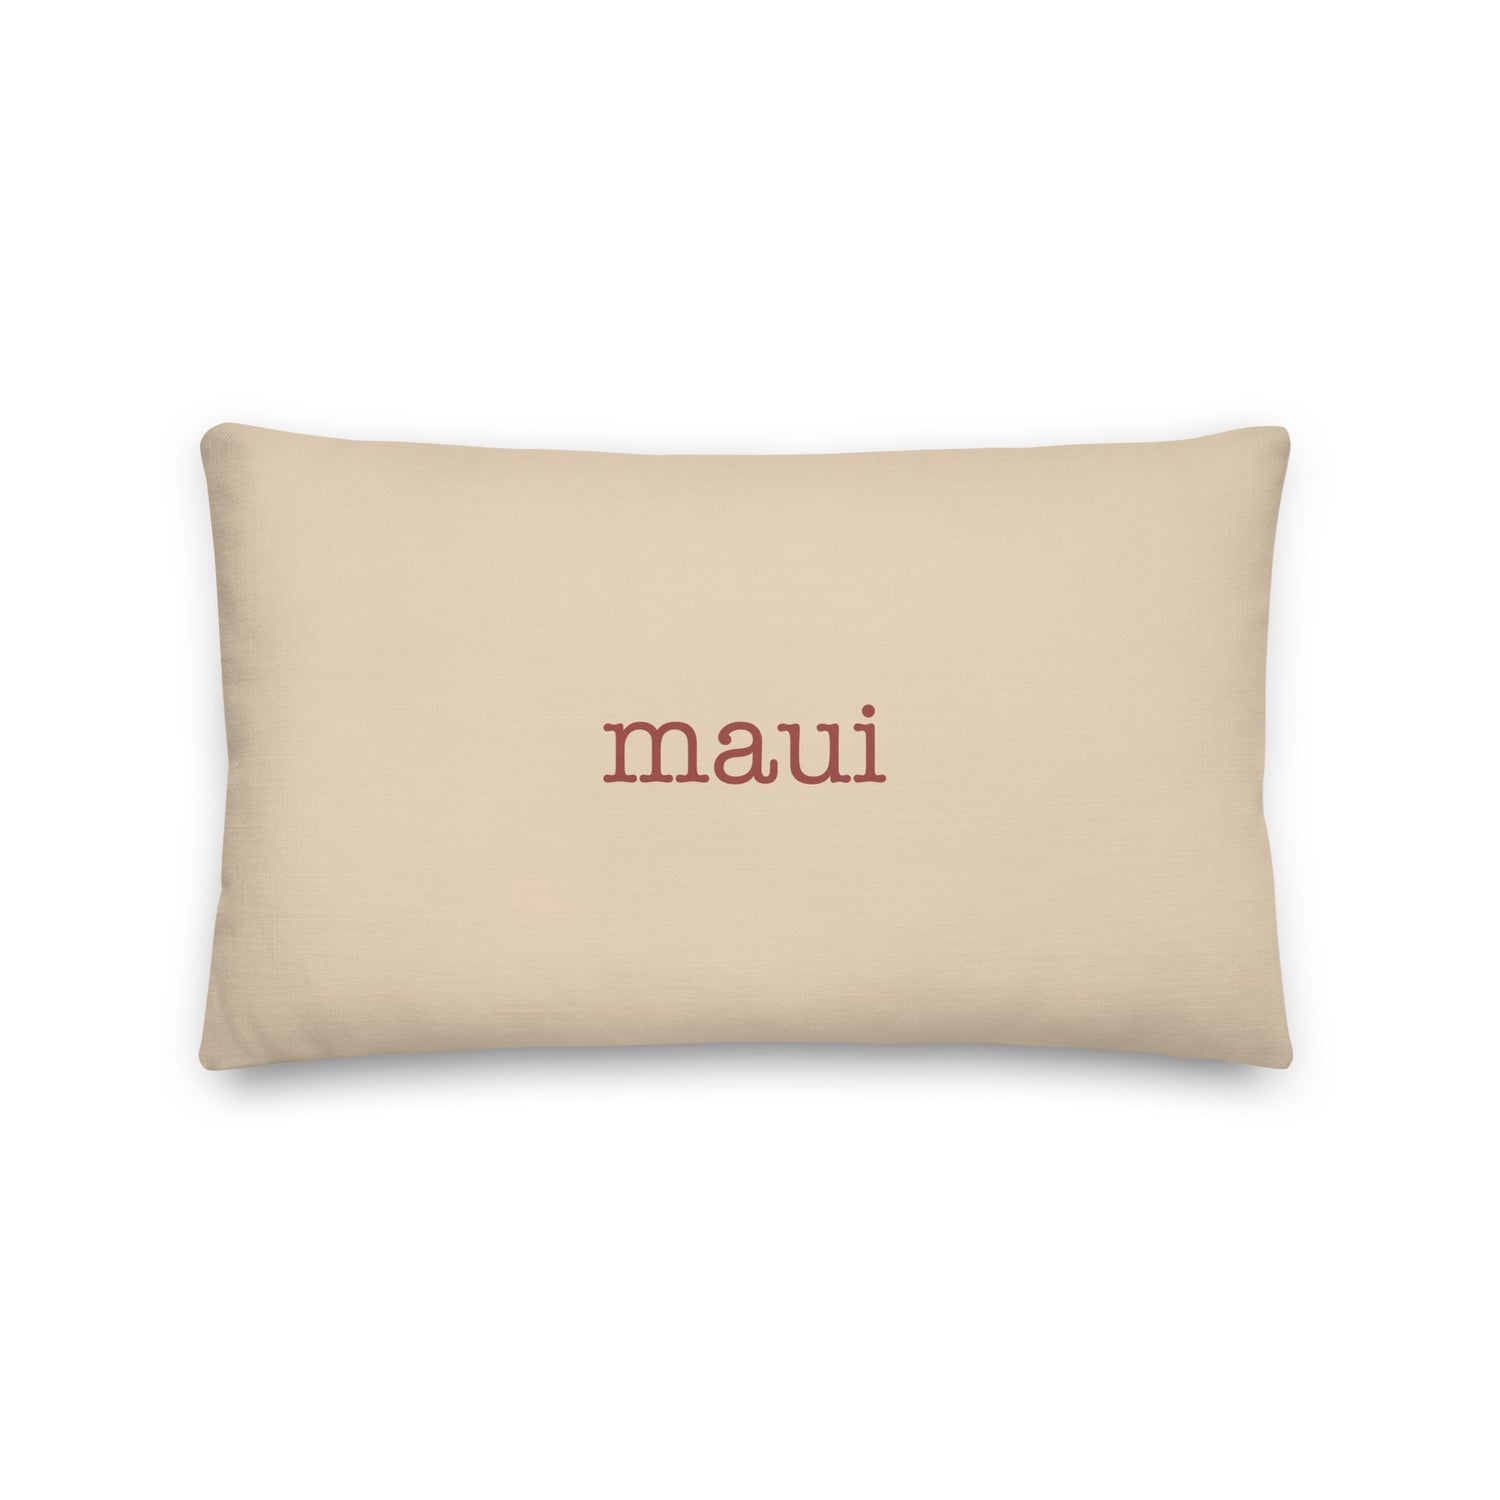 Maui Hawaii Pillows and Blankets • OGG Airport Code